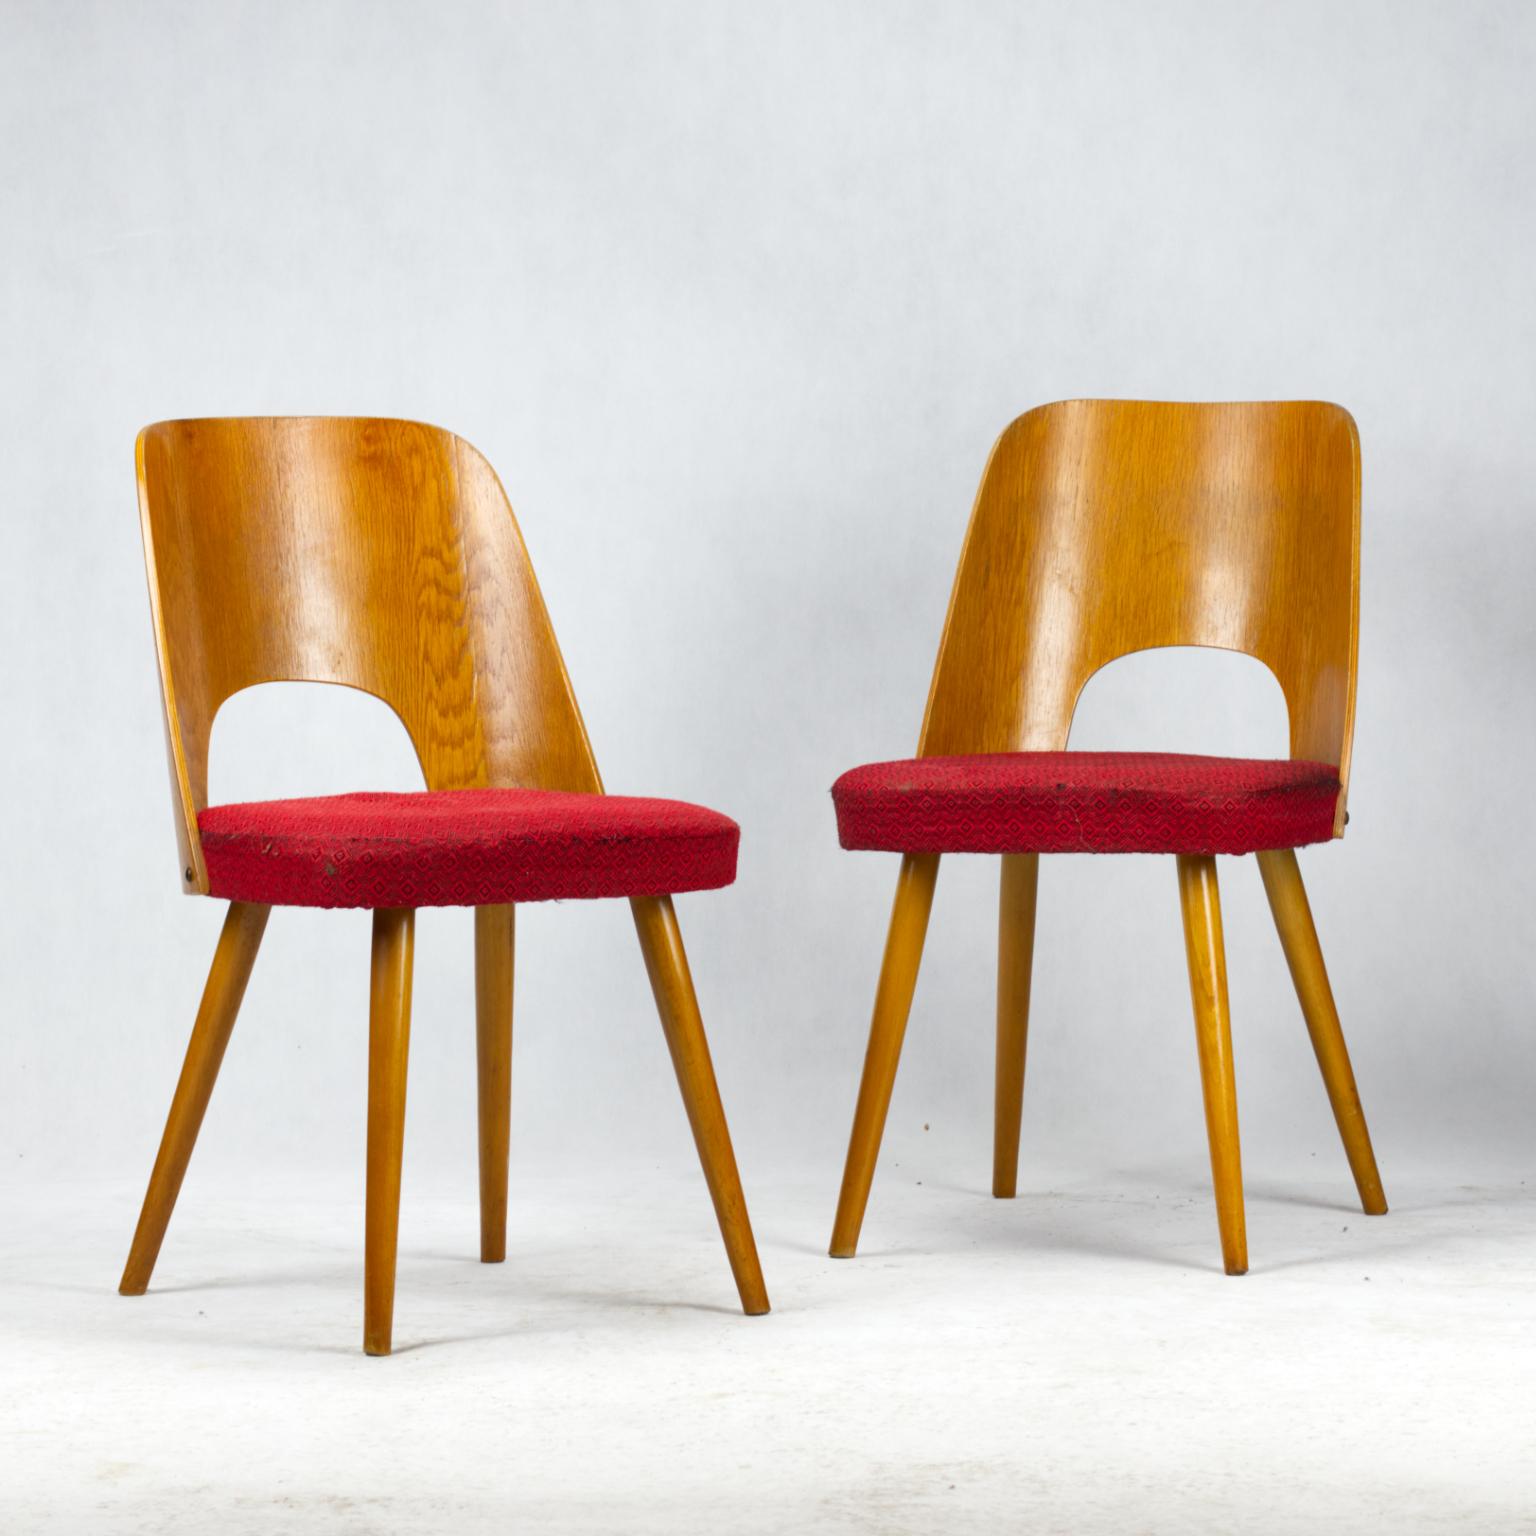 This set of two dining chairs was designed by Oswald Haerdtl for Thonet in 1955. The chairs are made of bent beech plywood formed structures and round tapered wooden legs.